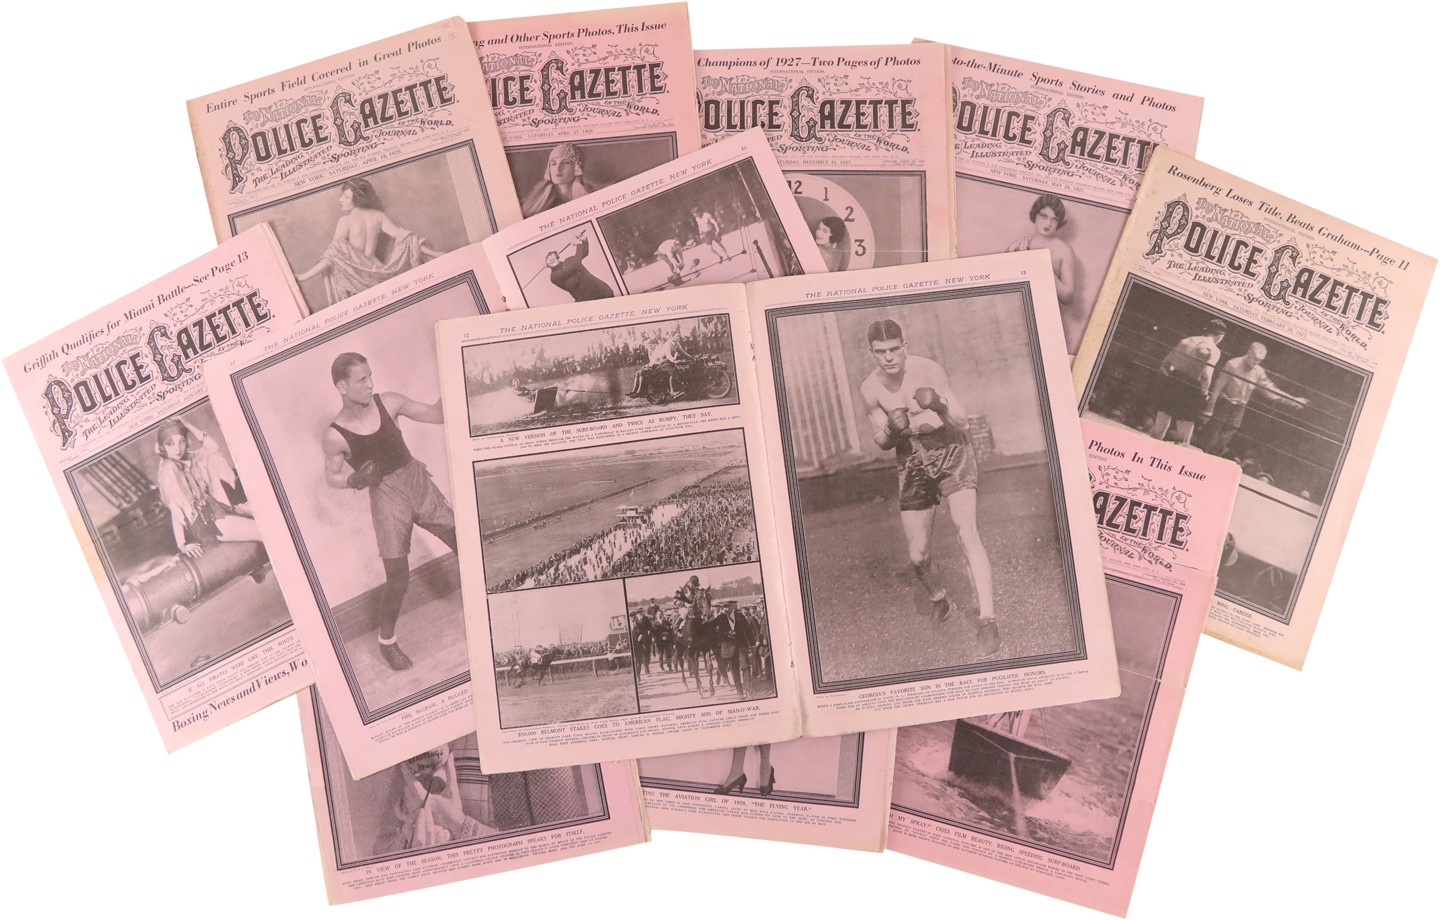 Tickets, Publications & Pins - National Police Gazettes from 1925-30 with Boxing Supplements (13)